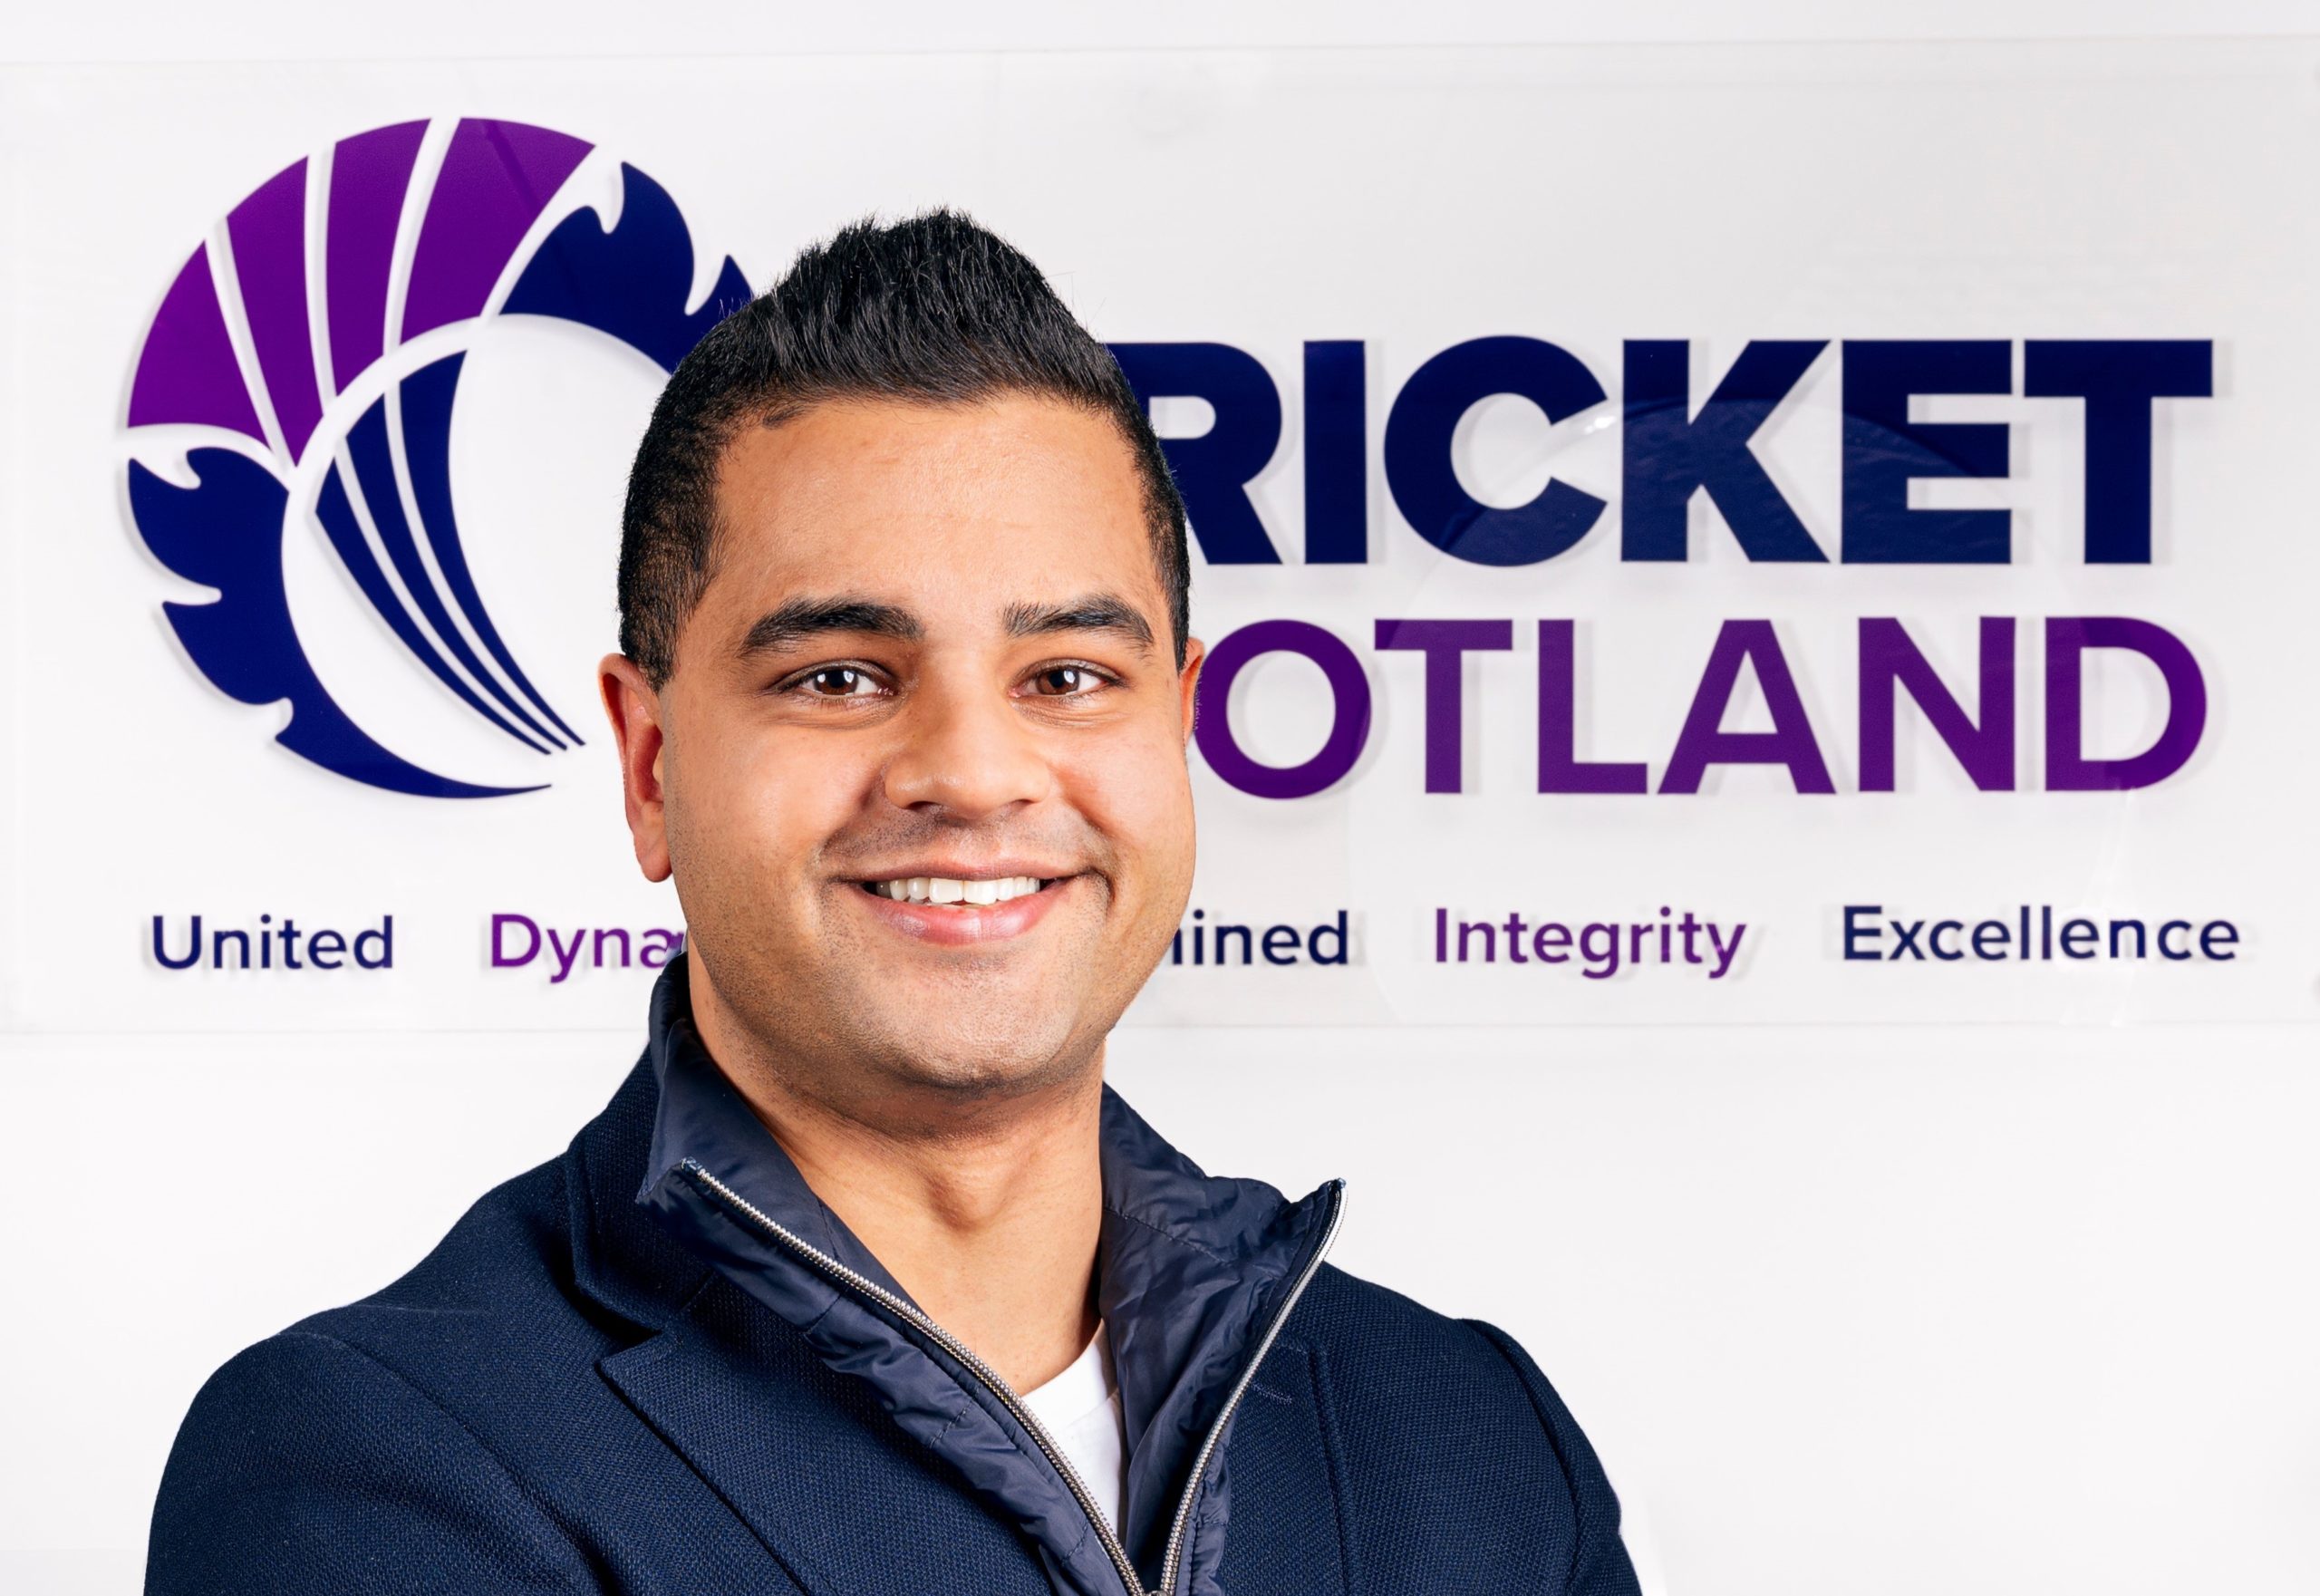 ANJAN LUTHRA RESIGNS AS CHAIR OF CRICKET SCOTLAND